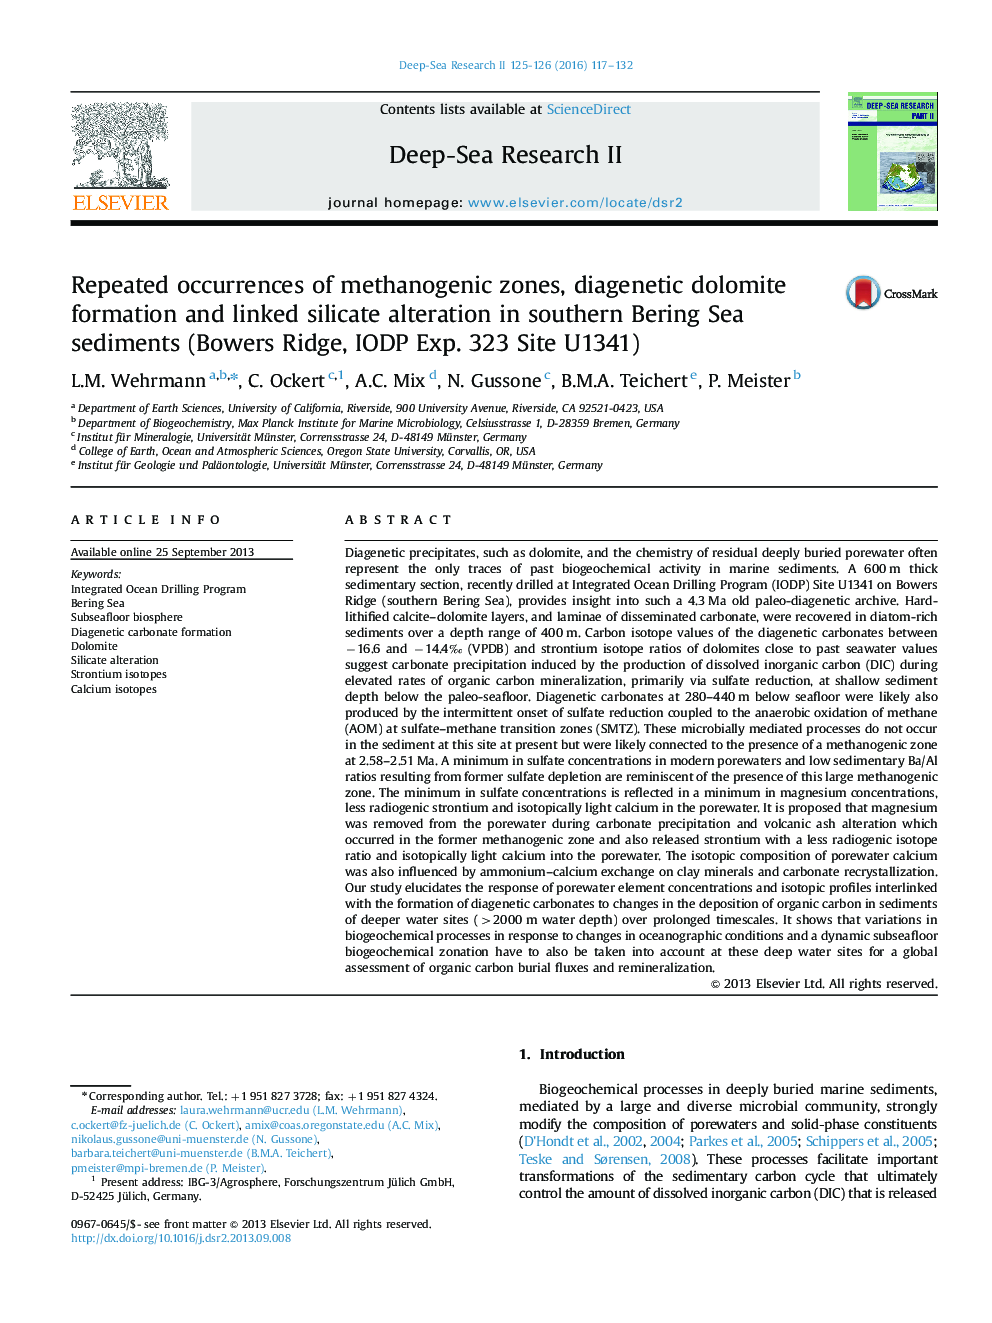 Repeated occurrences of methanogenic zones, diagenetic dolomite formation and linked silicate alteration in southern Bering Sea sediments (Bowers Ridge, IODP Exp. 323 Site U1341)